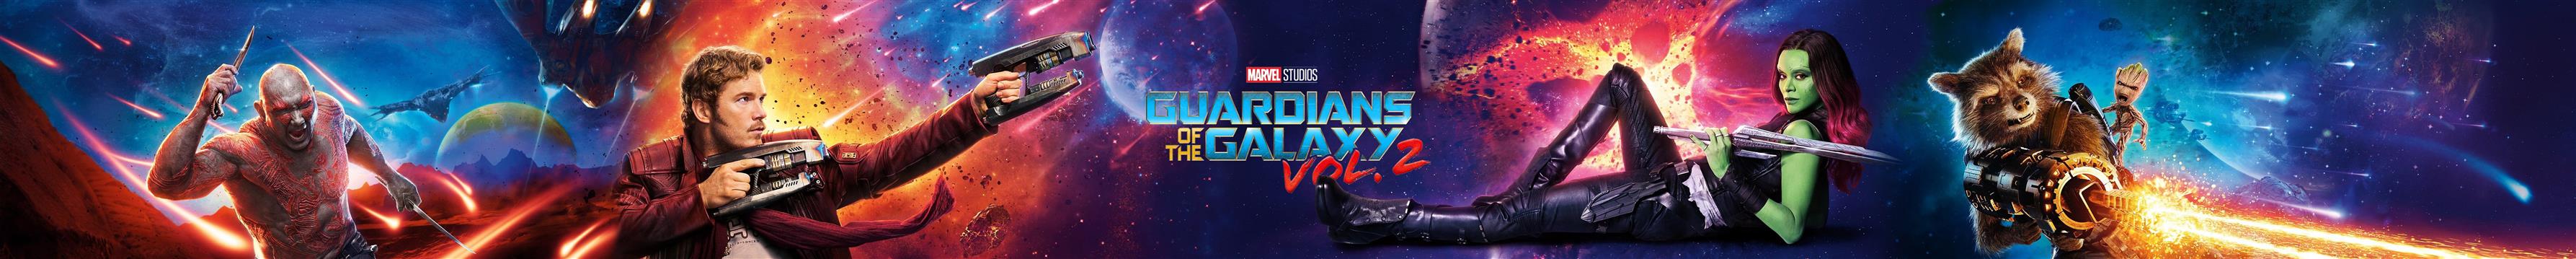 Guardians of the Galaxy Vol. 2, Marvel Cinematic Universe, Drax the Destroyer, HD wallpaper